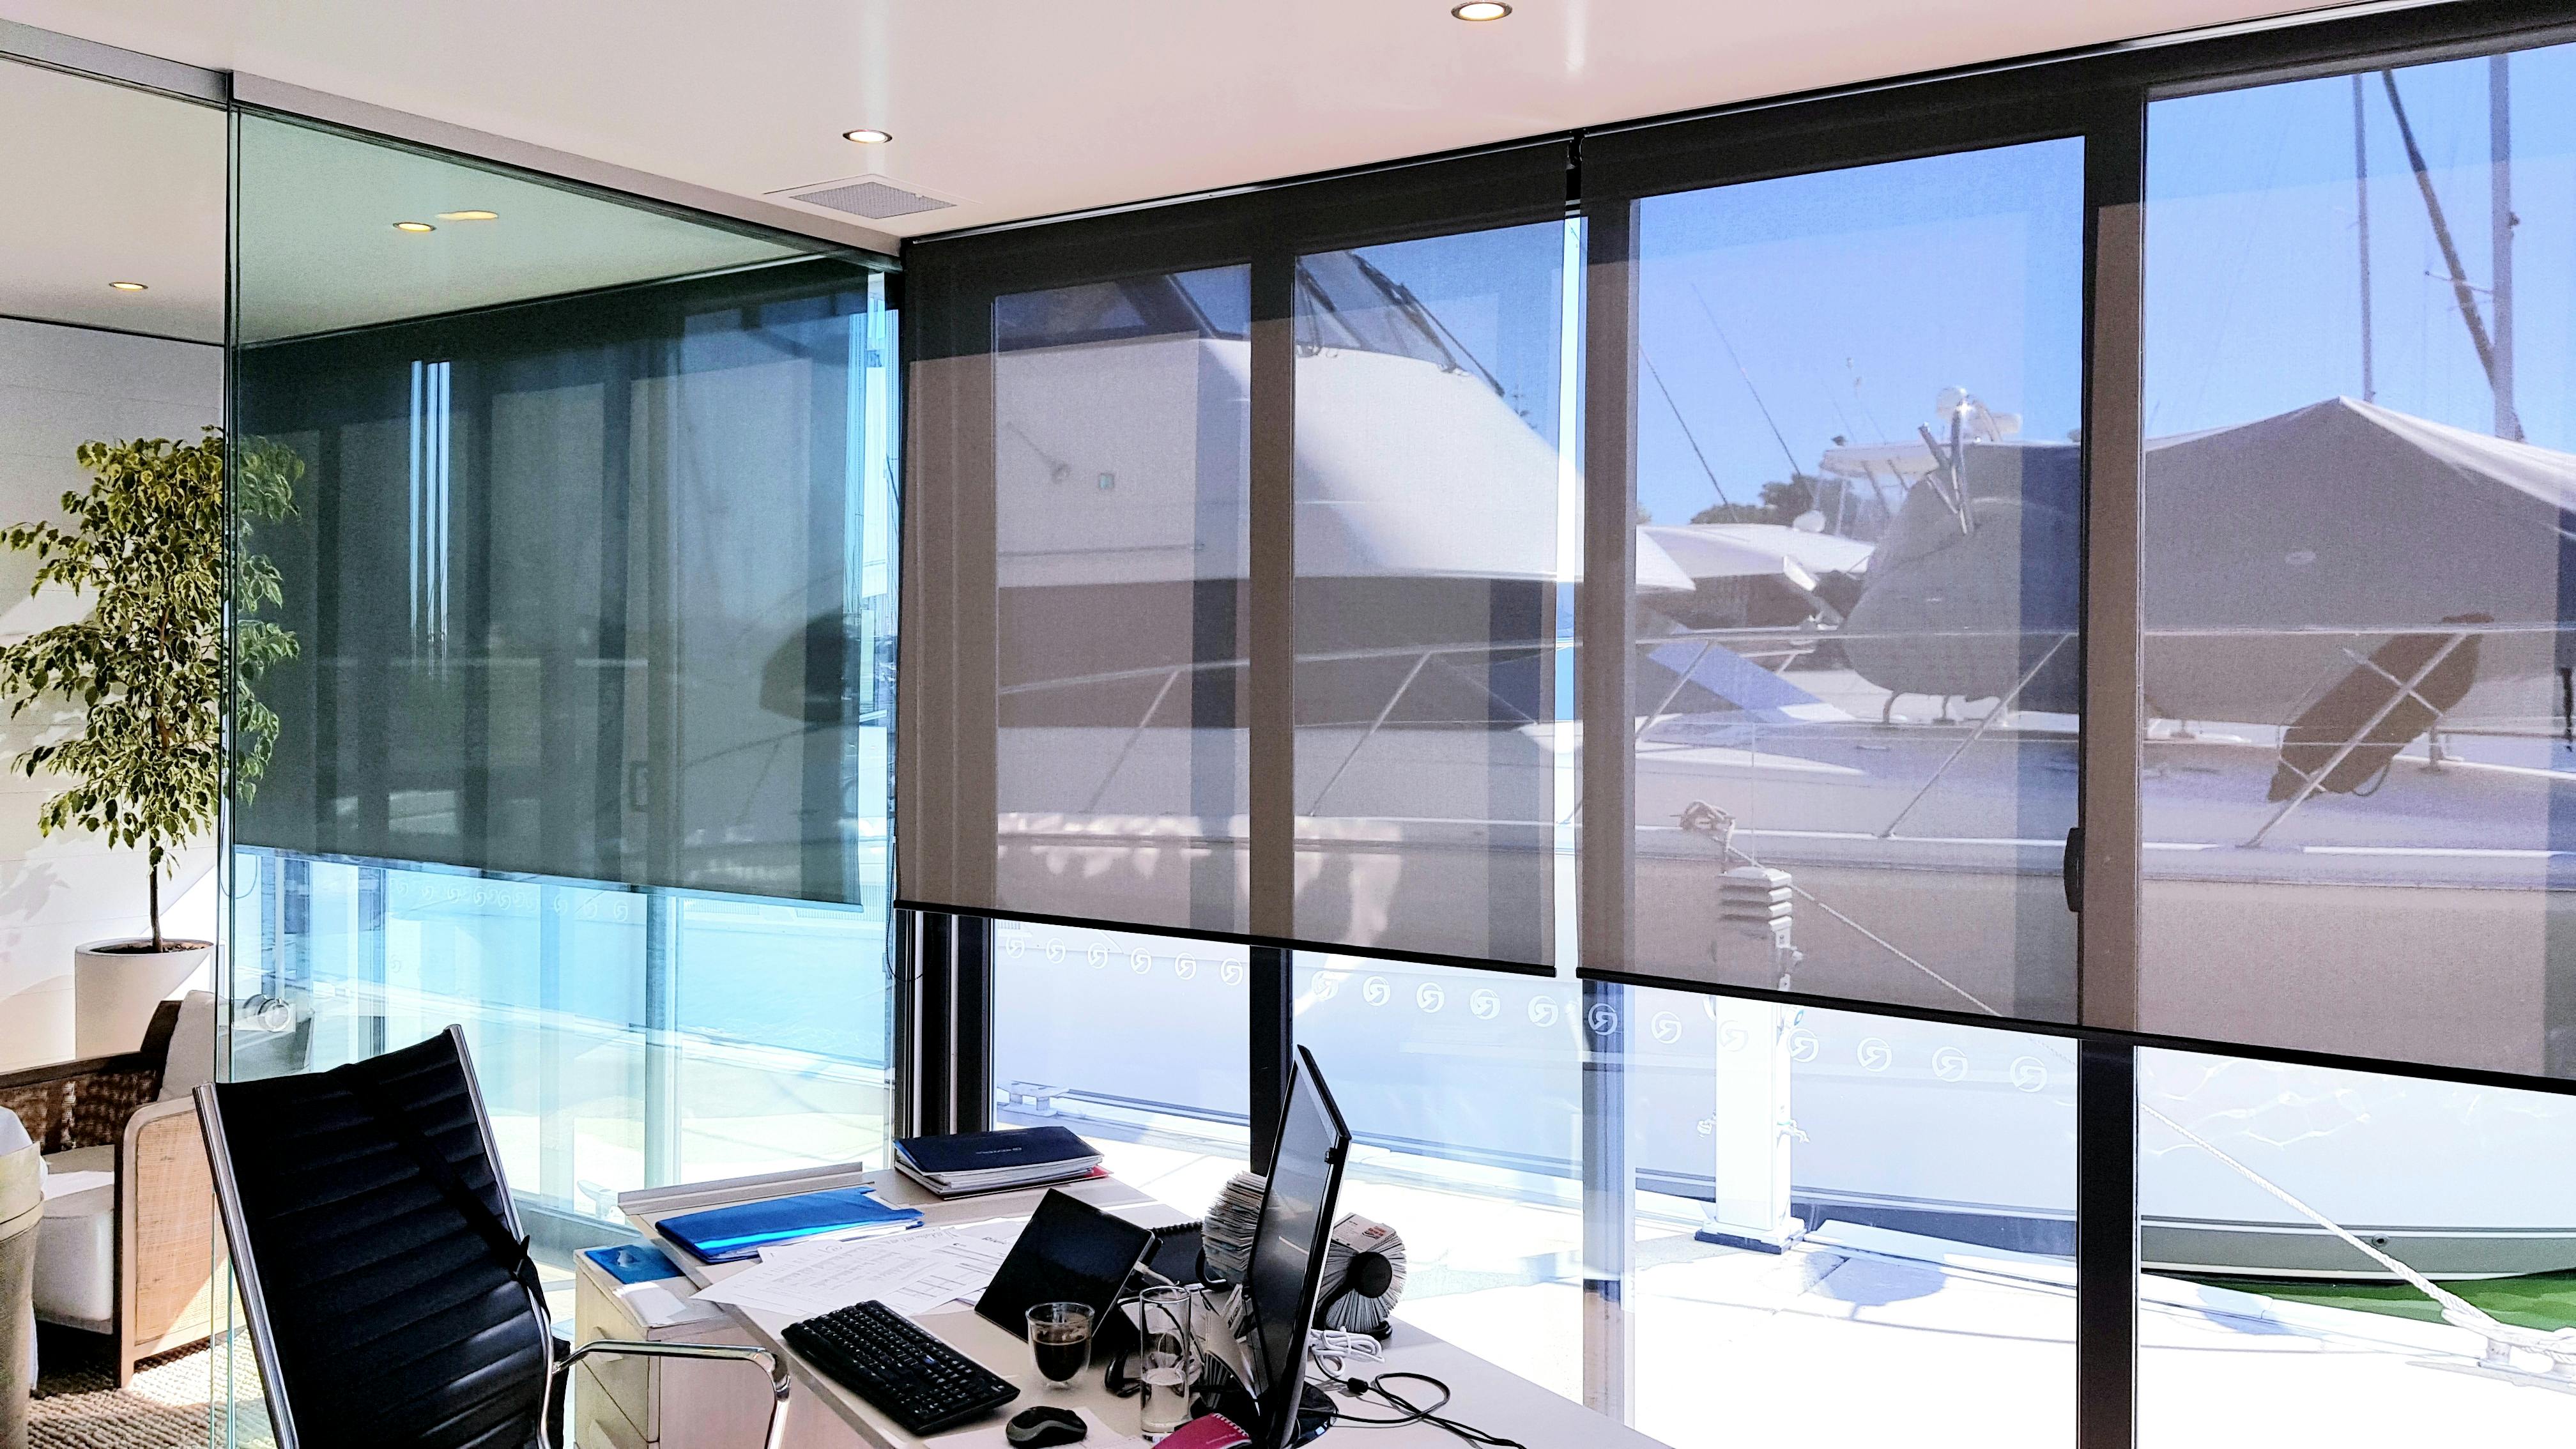 Commercial blinds nz